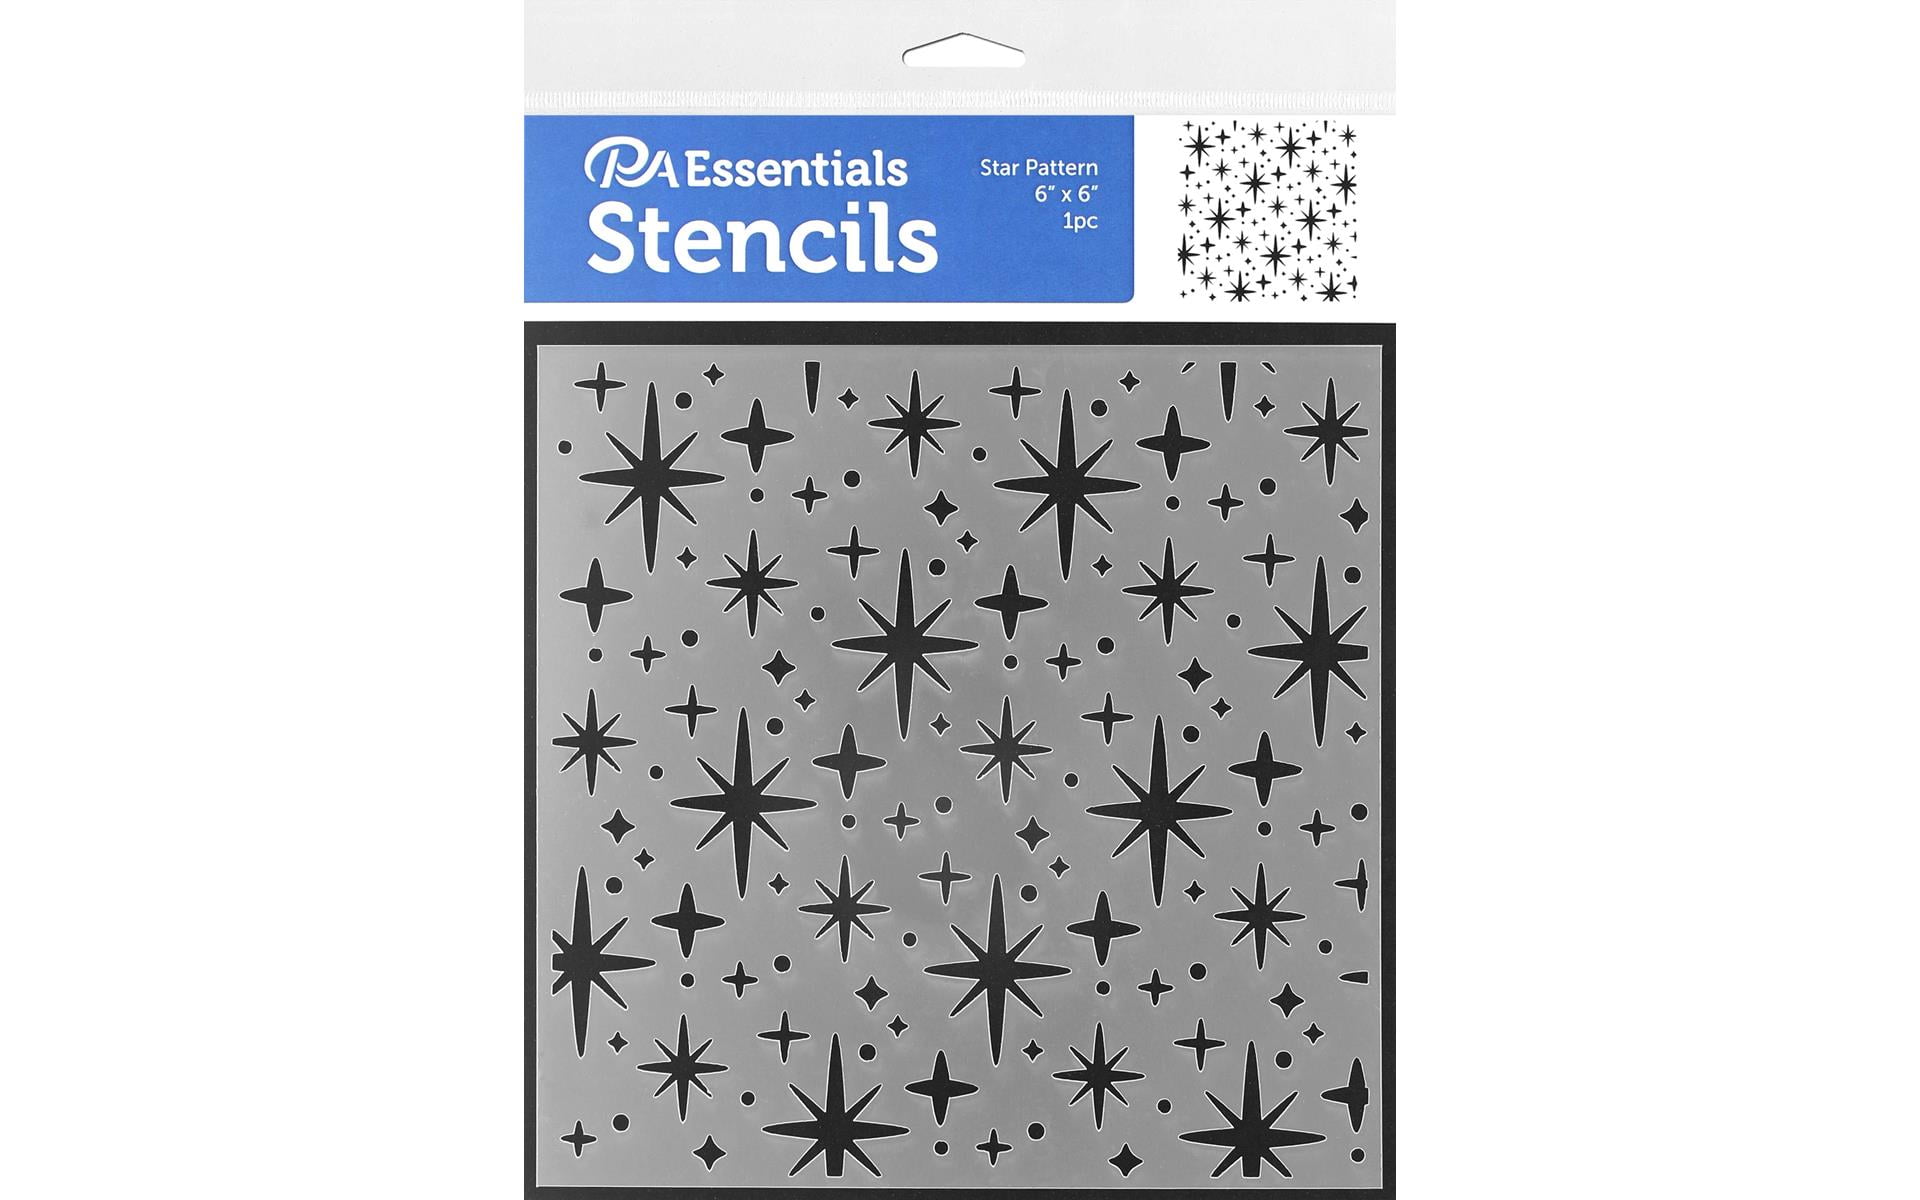 Reusable Celestial Shooting Star Wall Stencils Template Use on Paper Projects Scrapbook Journal Walls Floors Fabric Furniture Glass Wood etc. Shooting Stars Stencil 21.5 x 21.5 cm